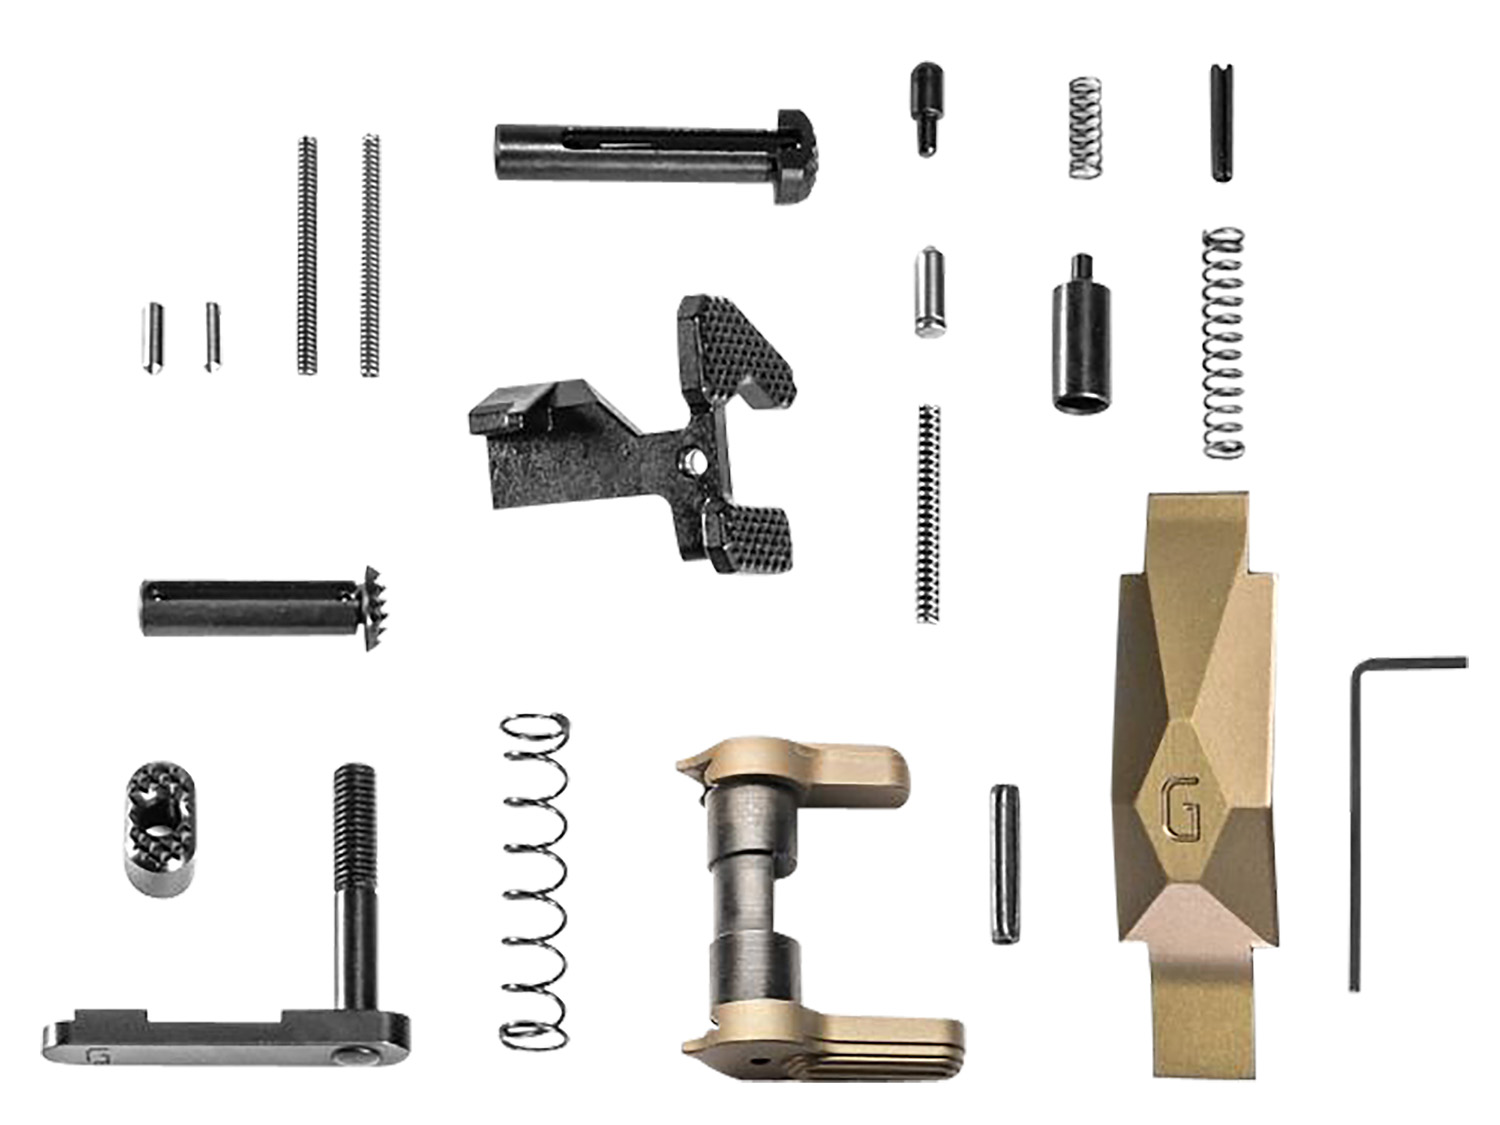 Geissele Automatics  Ultra Duty Lower Parts Kit DDC, Ambi Safety, Oversized Bolt Release/Catch for AR-15